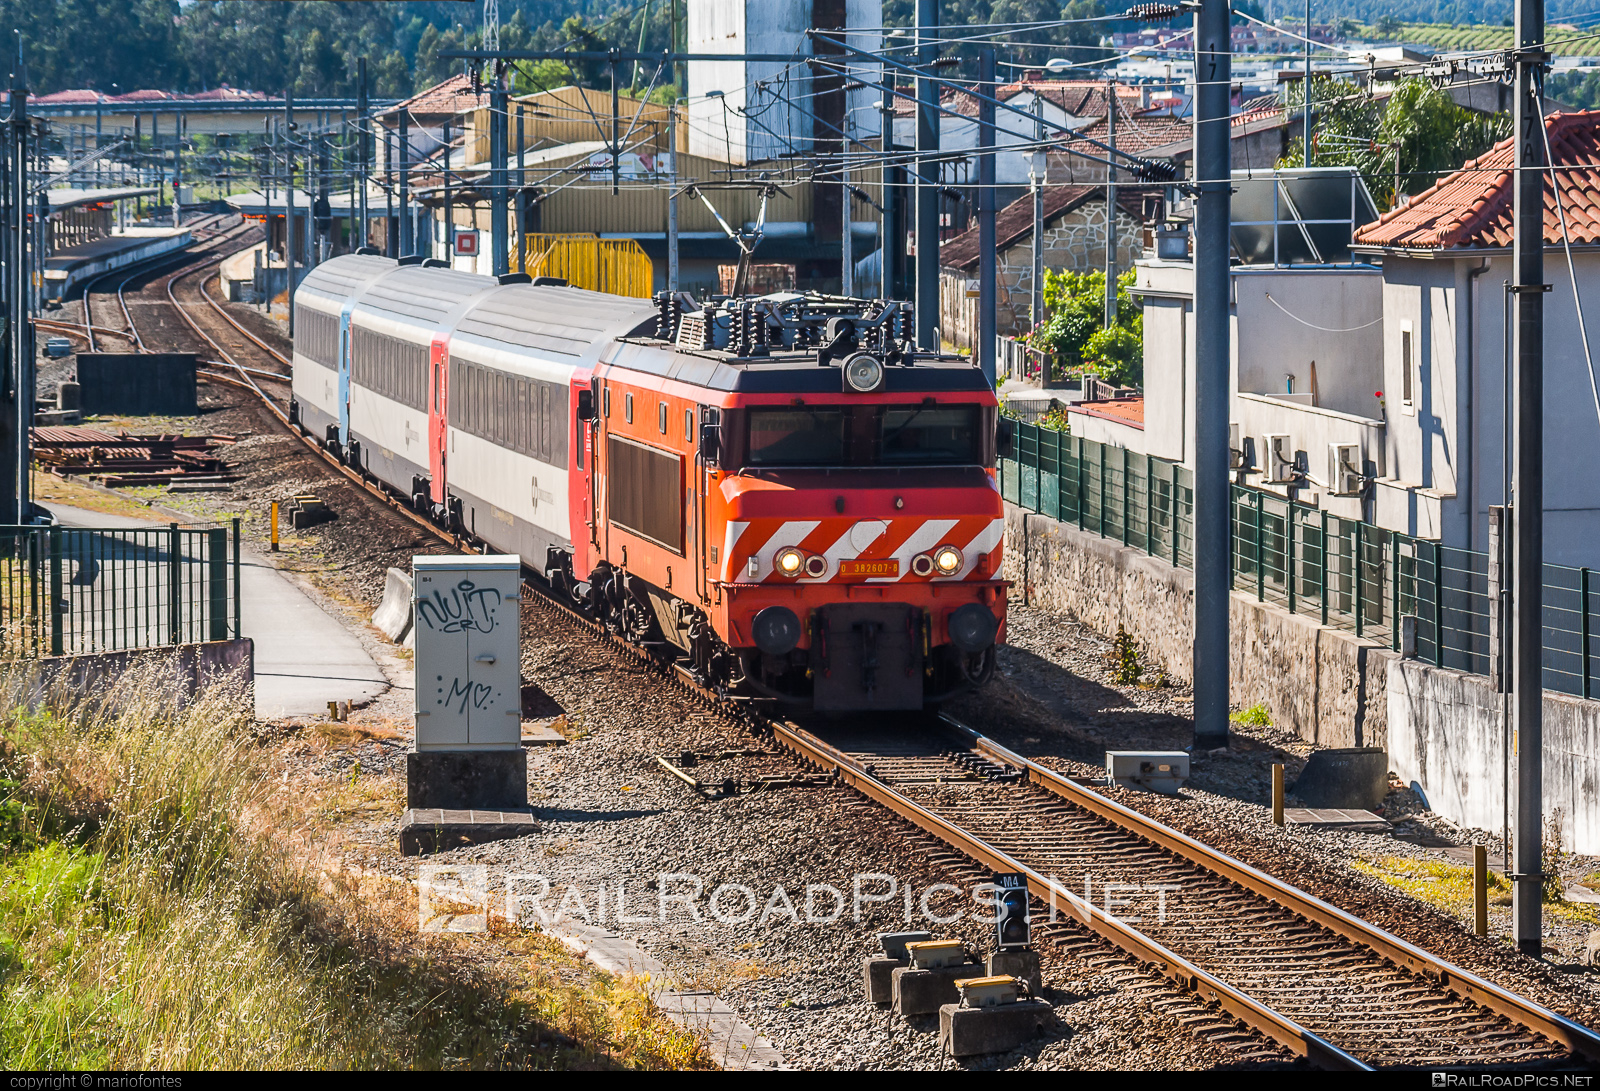 CP Class 2600 - 2607 operated by CP - Comboios de Portugal, E.P.E. #comboiosDePortugal #comboiosDePortugalEPE #cpClass2600 #nezCassee #sncfBB15000